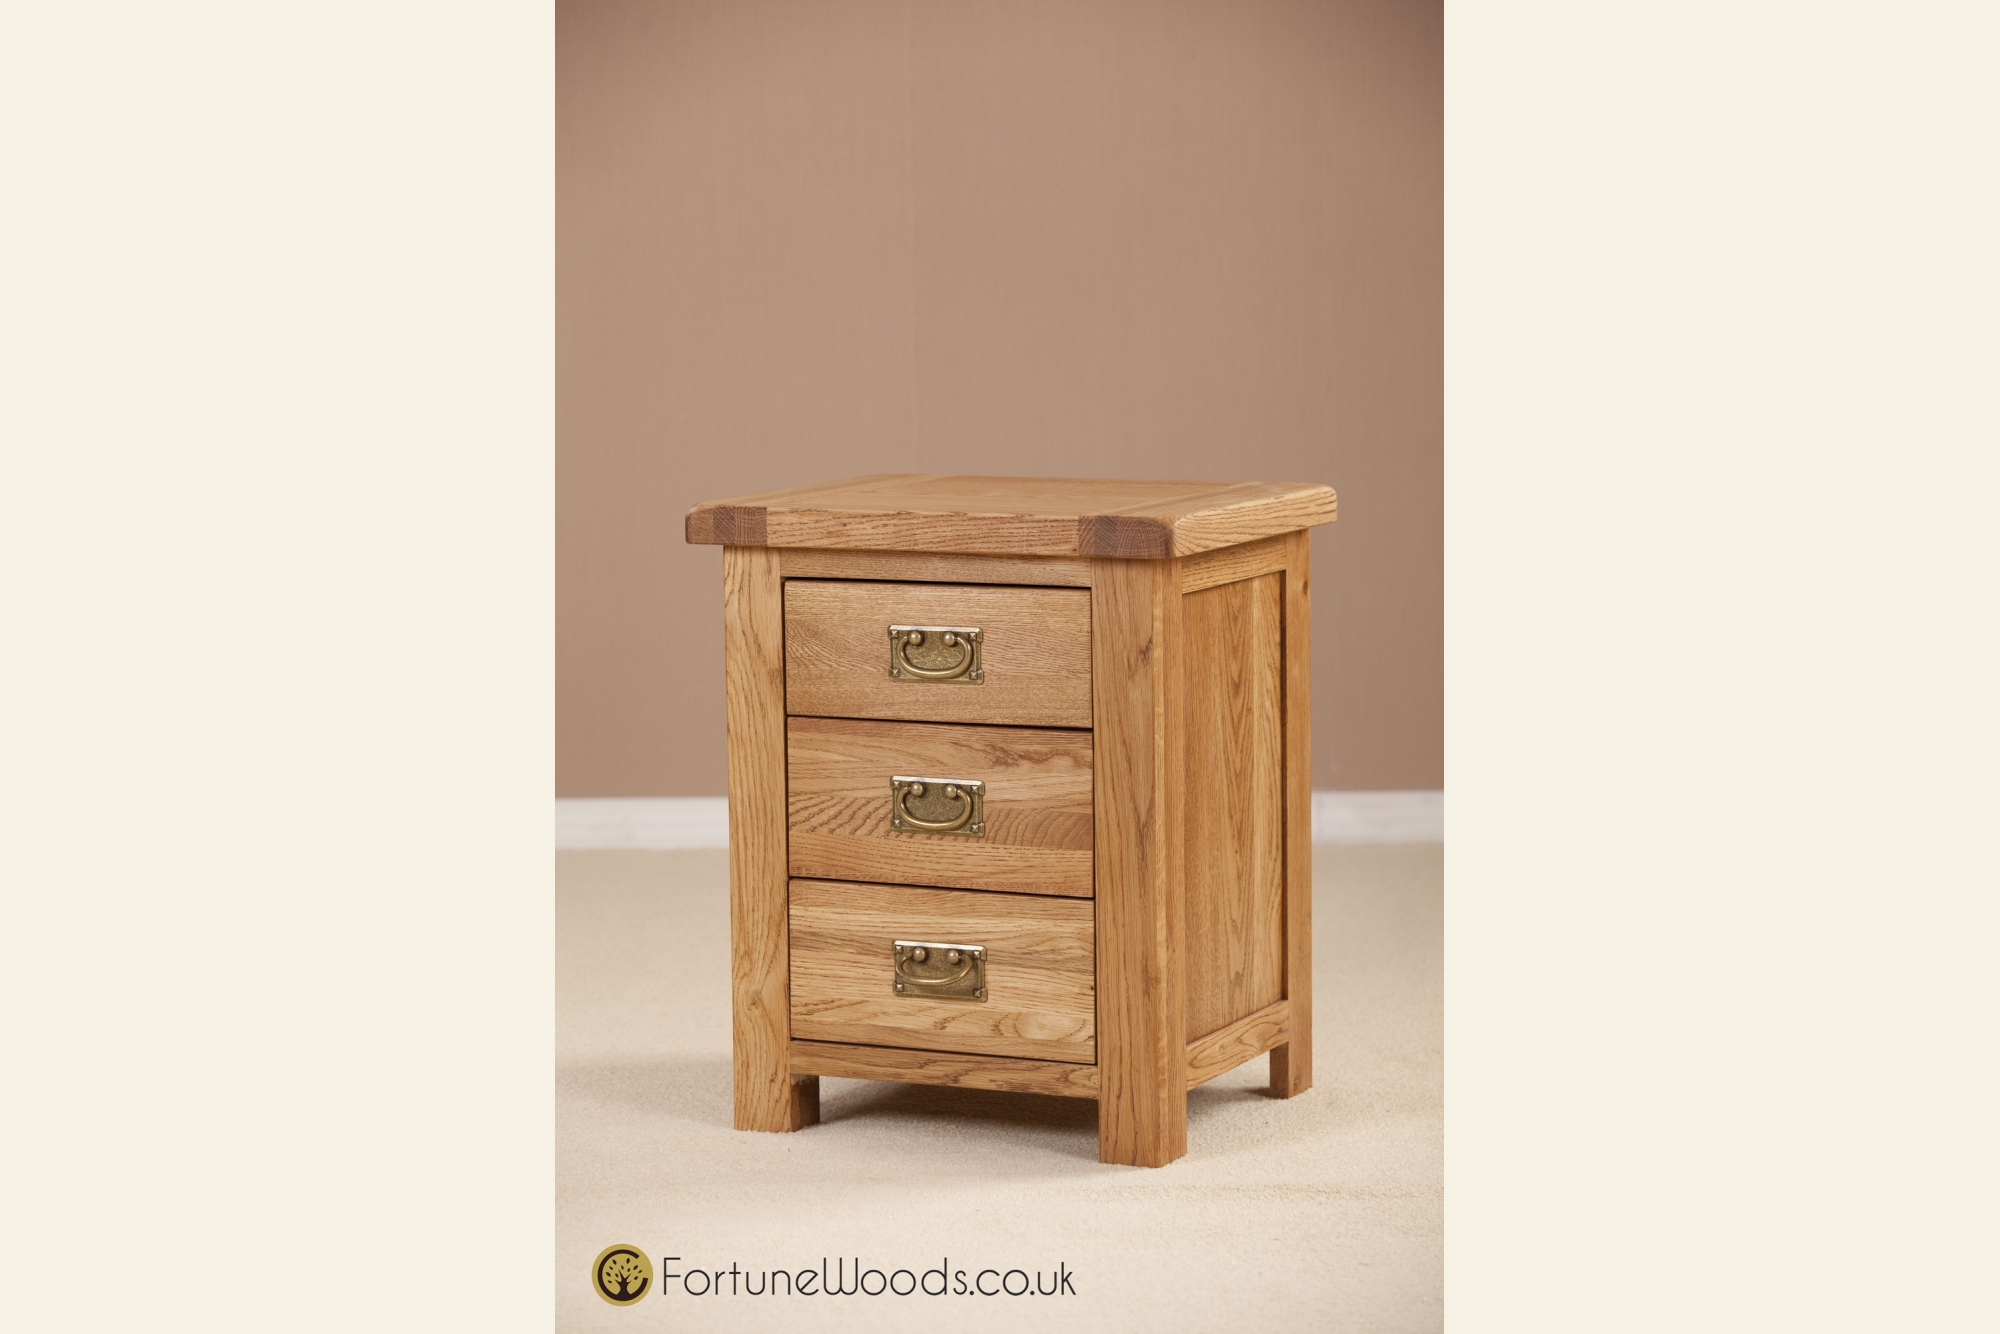 Fortune Woods Country 3 Drawer Bedside